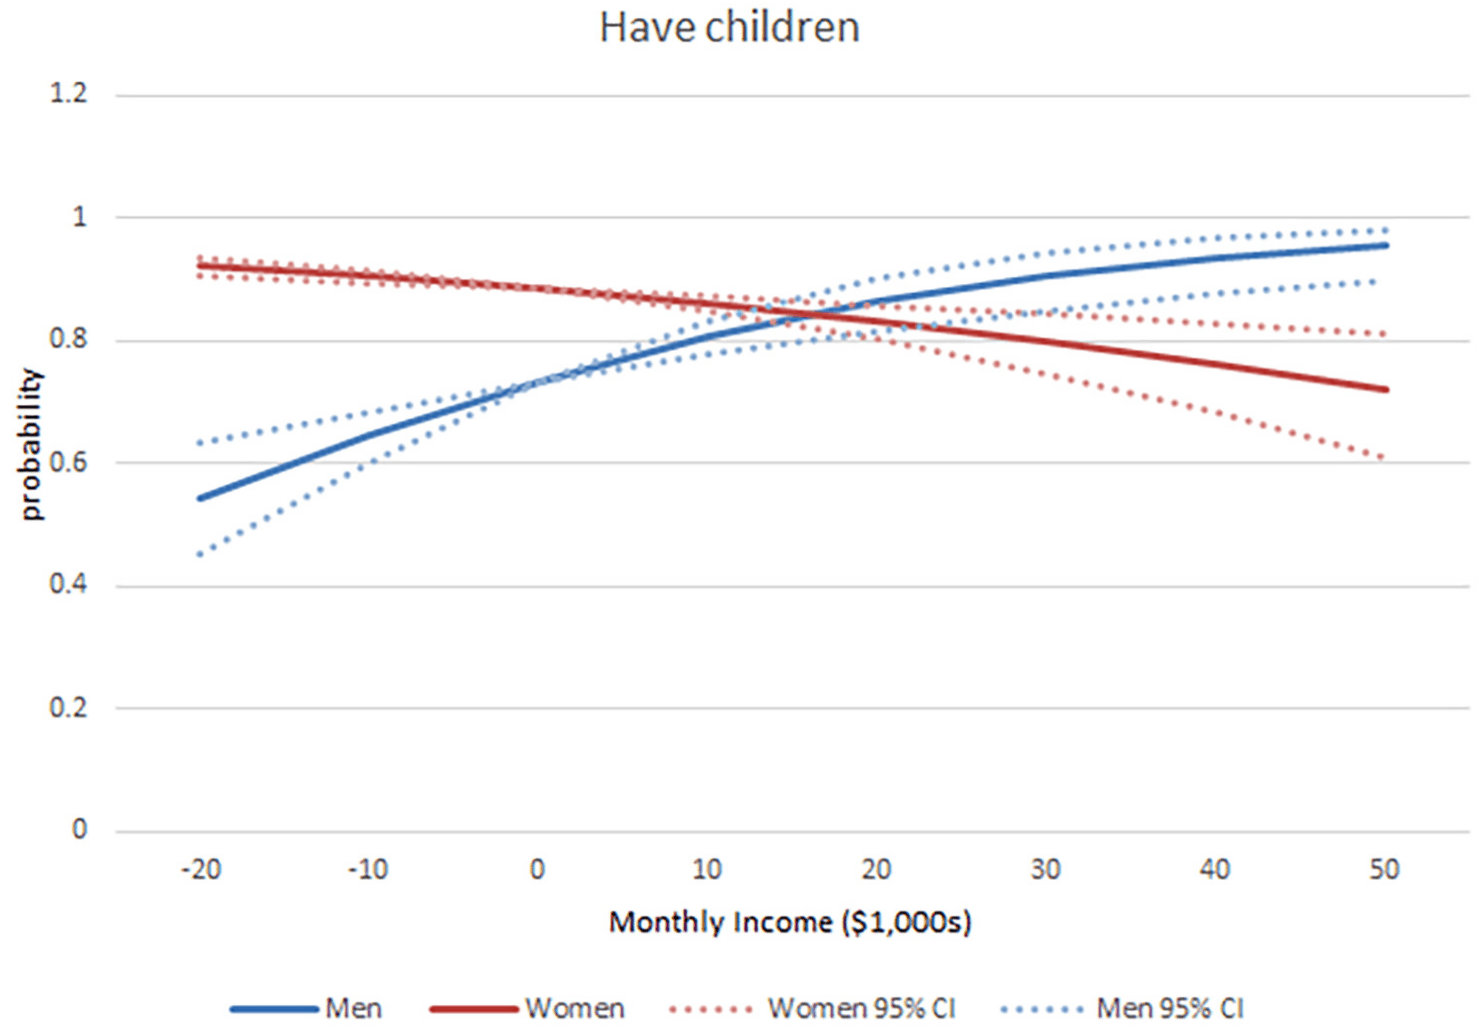 Figure 4: Probability ever have children by income. (Model prediction with age, education, proportions Black and Hispanic set to their means.)